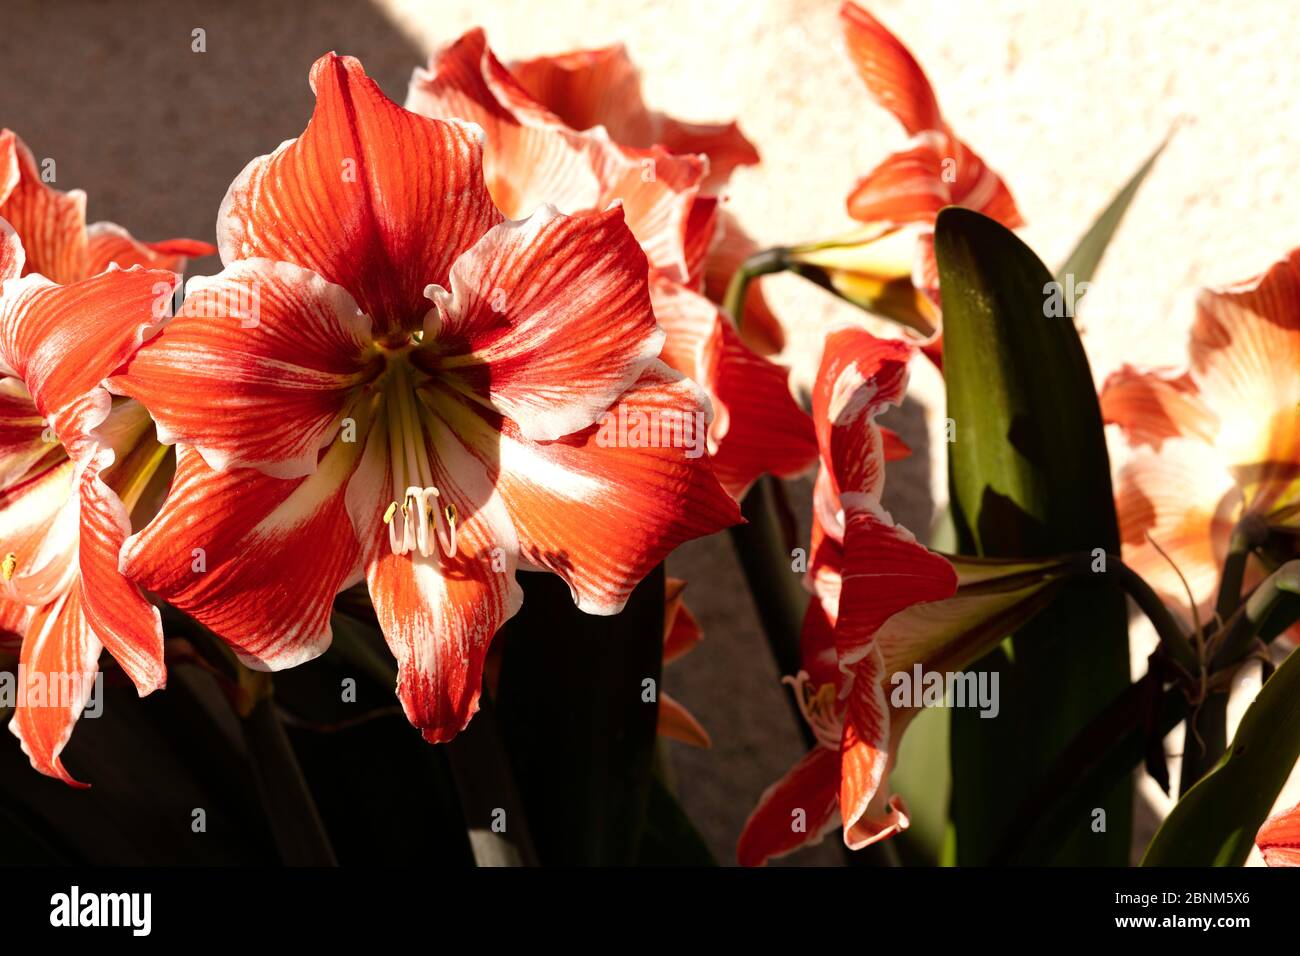 red and white lilies with pollen laden yellow stamens Stock Photo